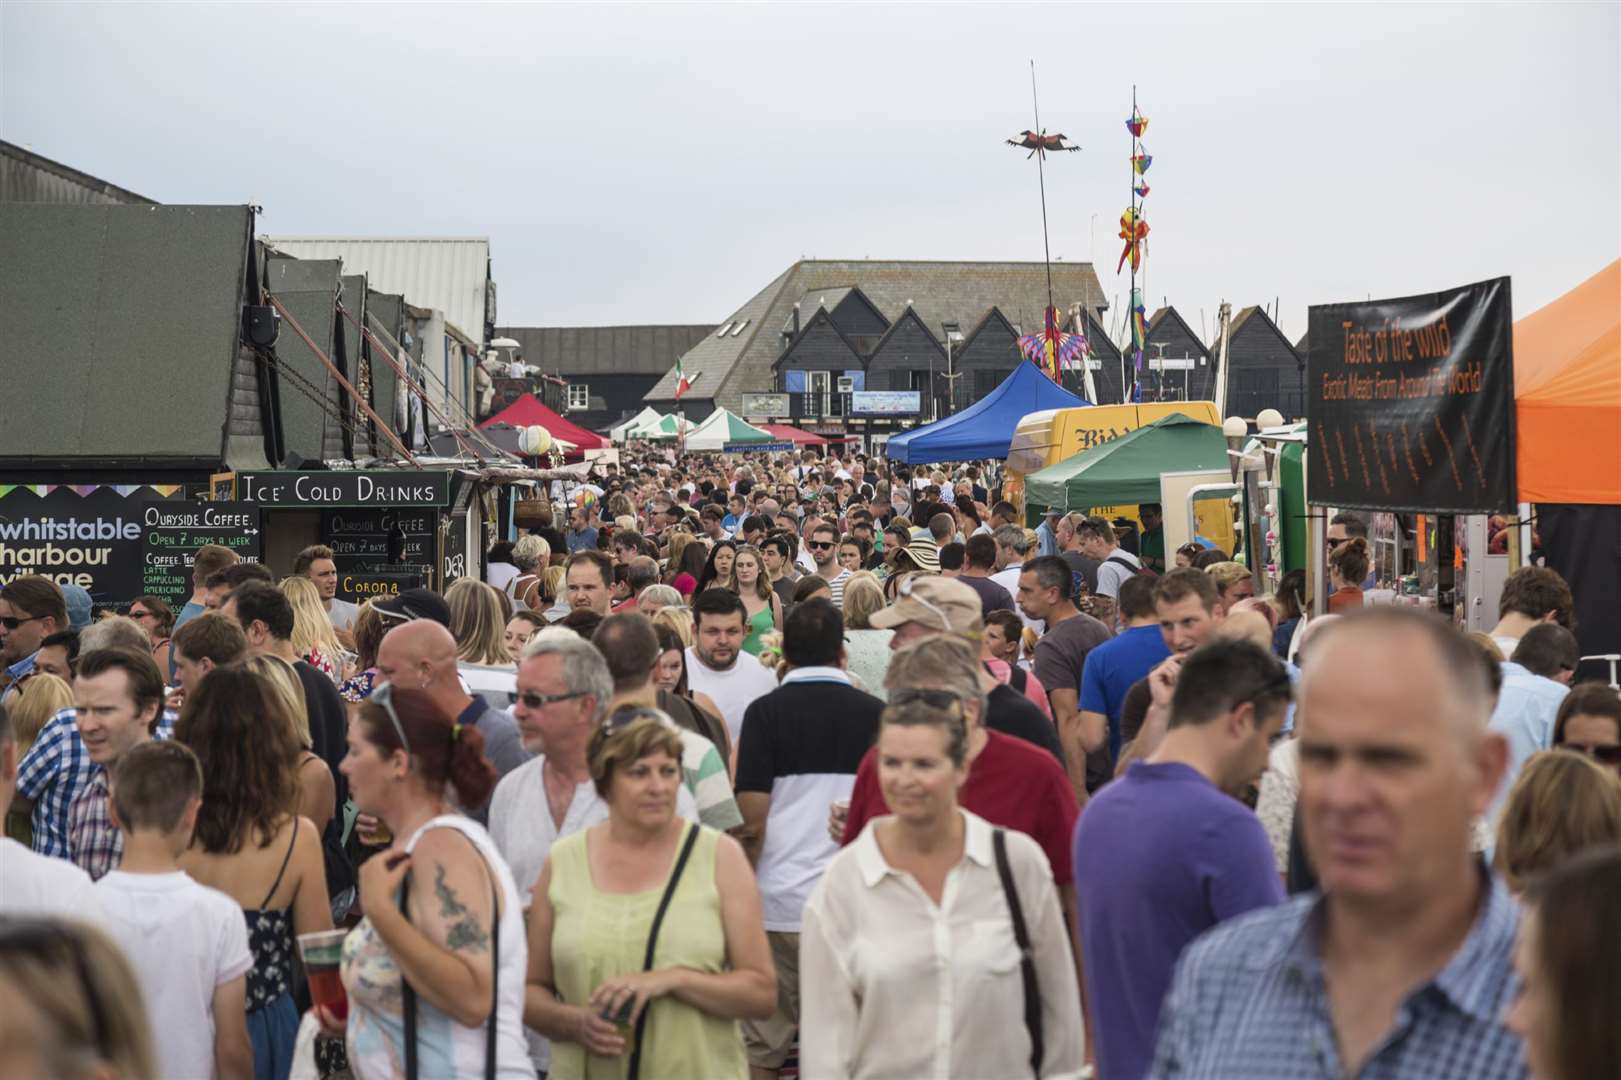 Crowds of tourists and locals fill the harbour enjoying the quaint stalls during Whitstable Oyster Festival